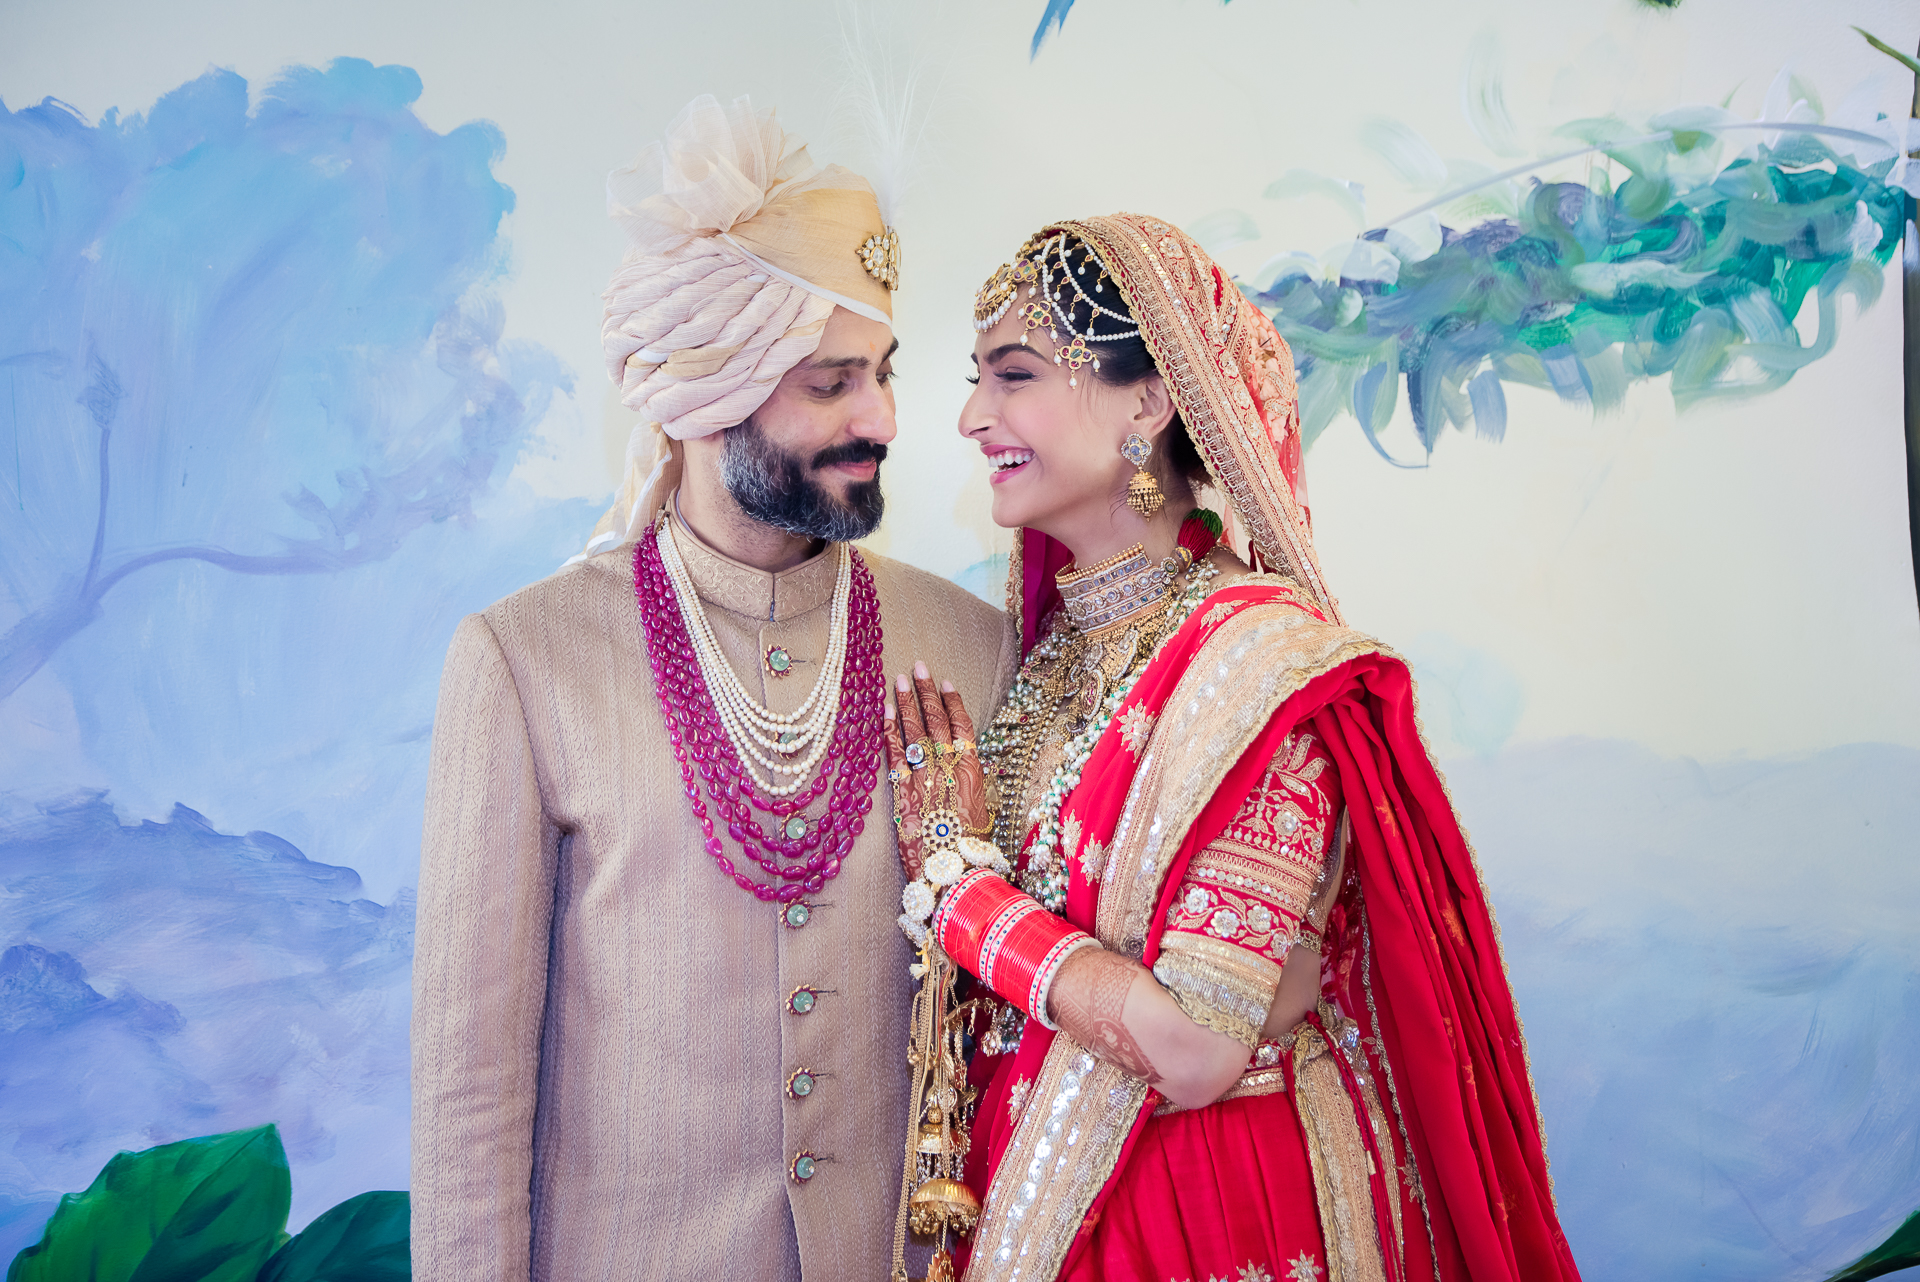 EXCLUSIVE: Want to know how Sonam Kapoor & Anand Ahuja were as a bride and groom? Wedding Photographer REVEALS